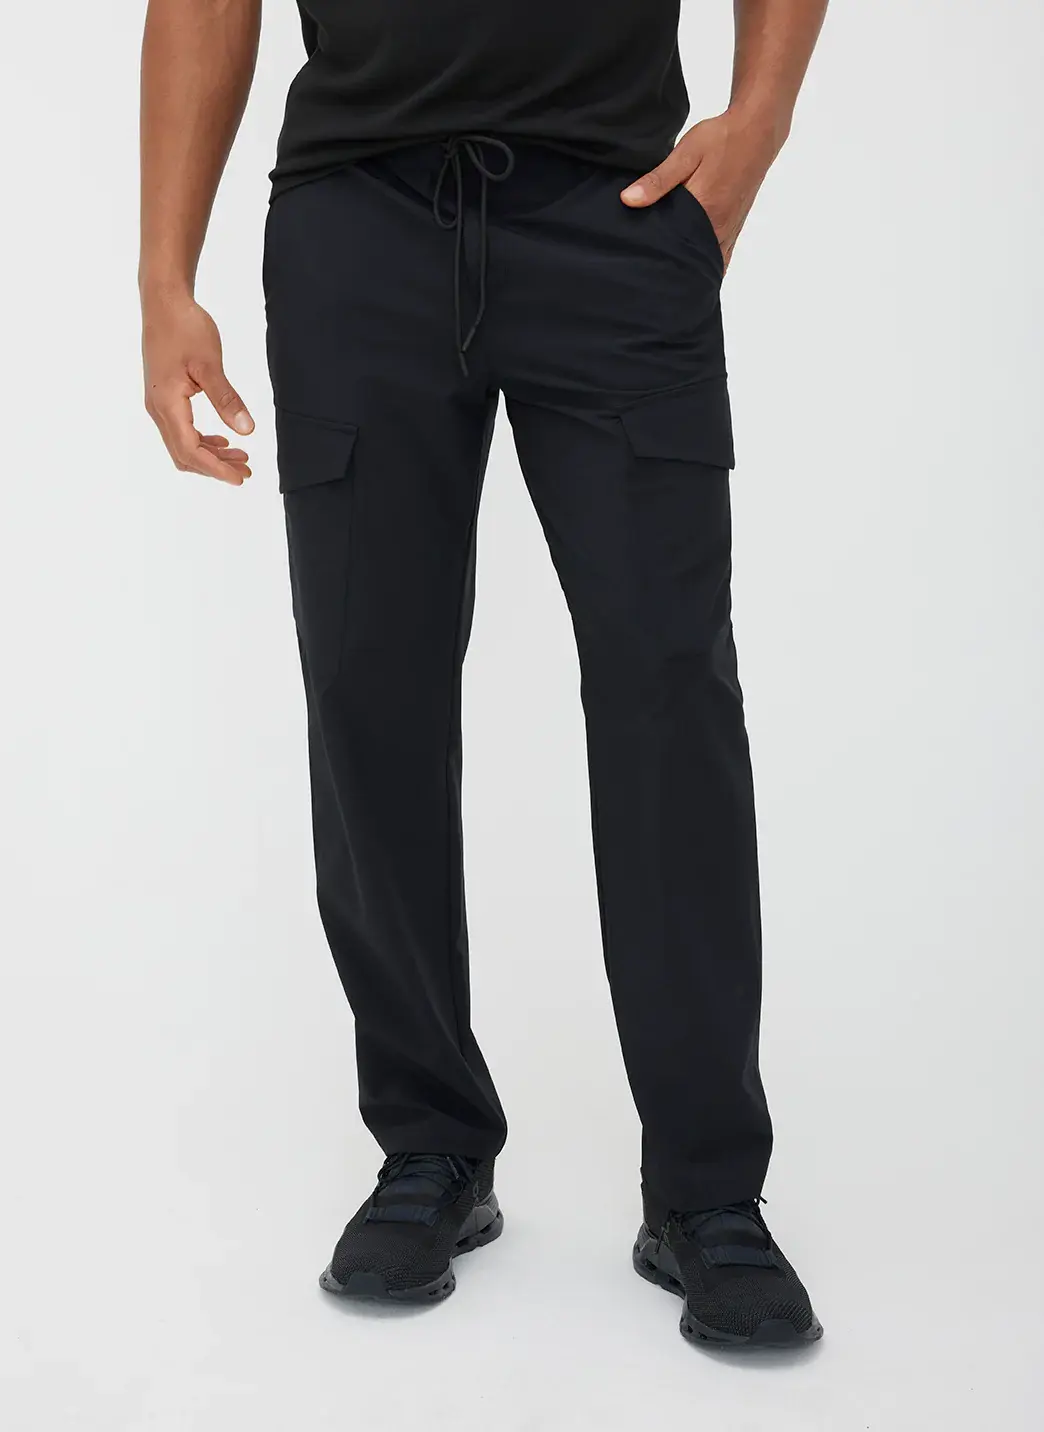 Kit And Ace Urban Task Cargo Pants. 1